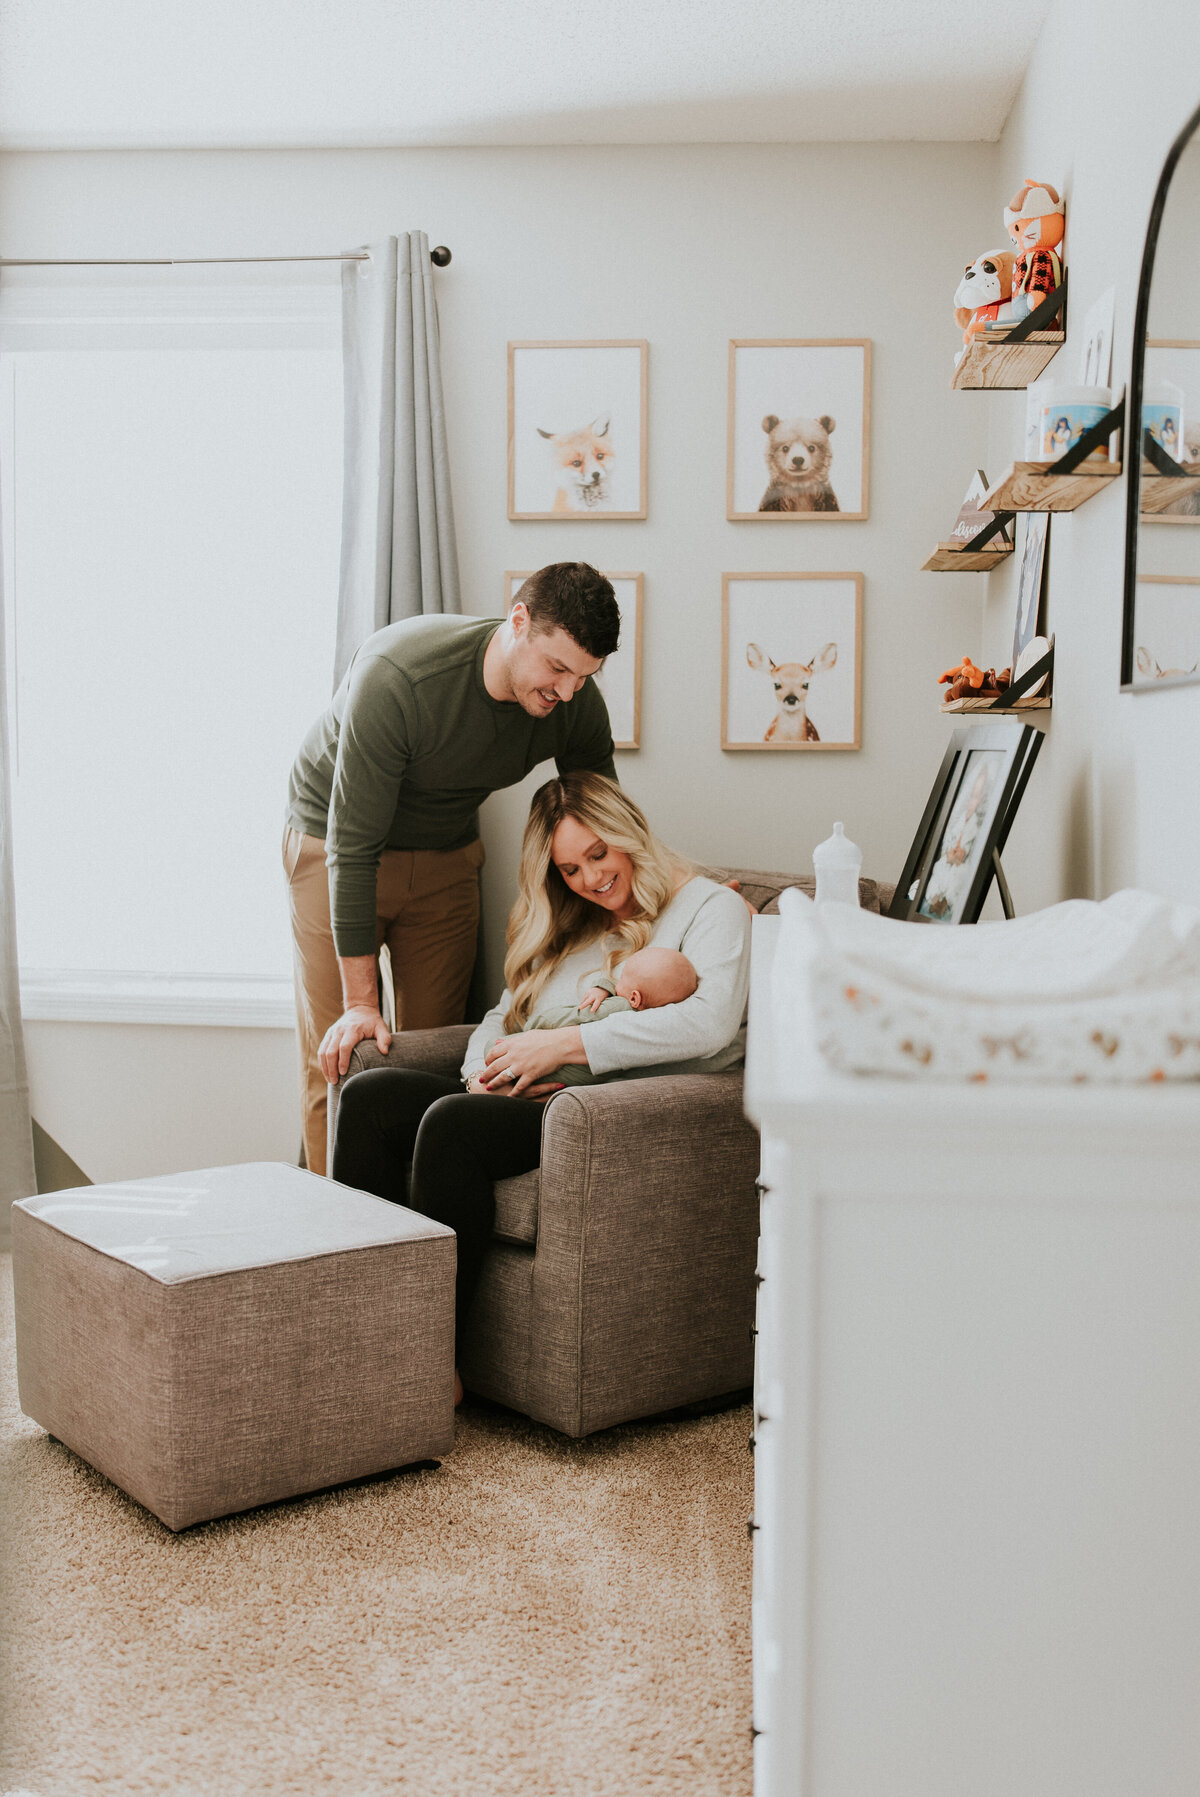 Create a family nest with in-home newborn photography in St. Paul. Shannon Kathleen Photography transforms your home into a cocoon of love for your precious newborn